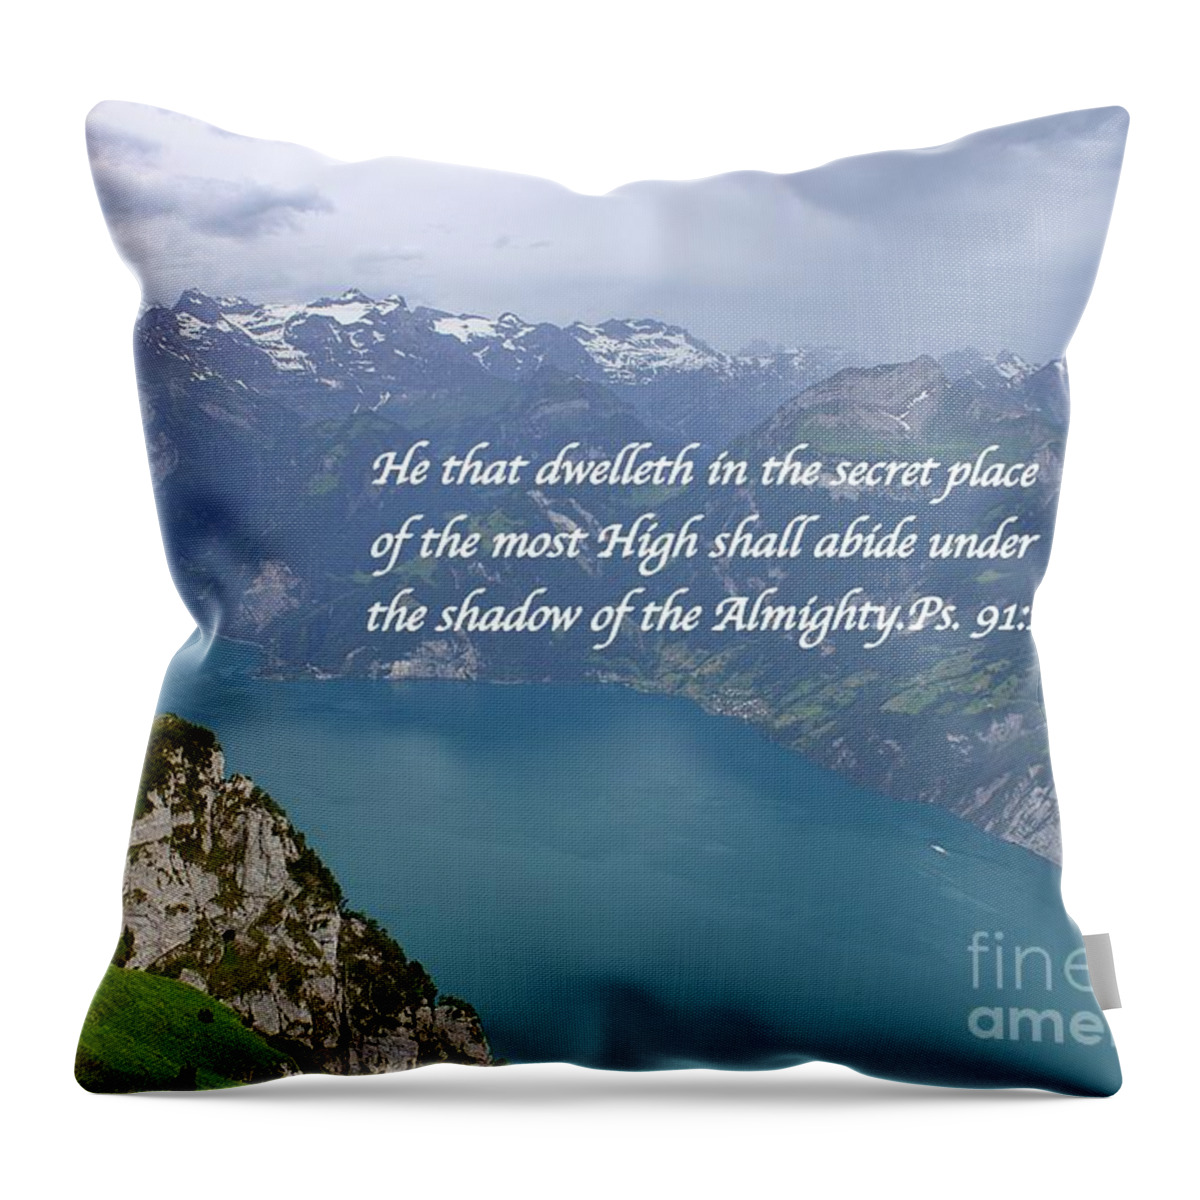 Switzerland Throw Pillow featuring the photograph Ps. 91v1 by Yvonne M Smith